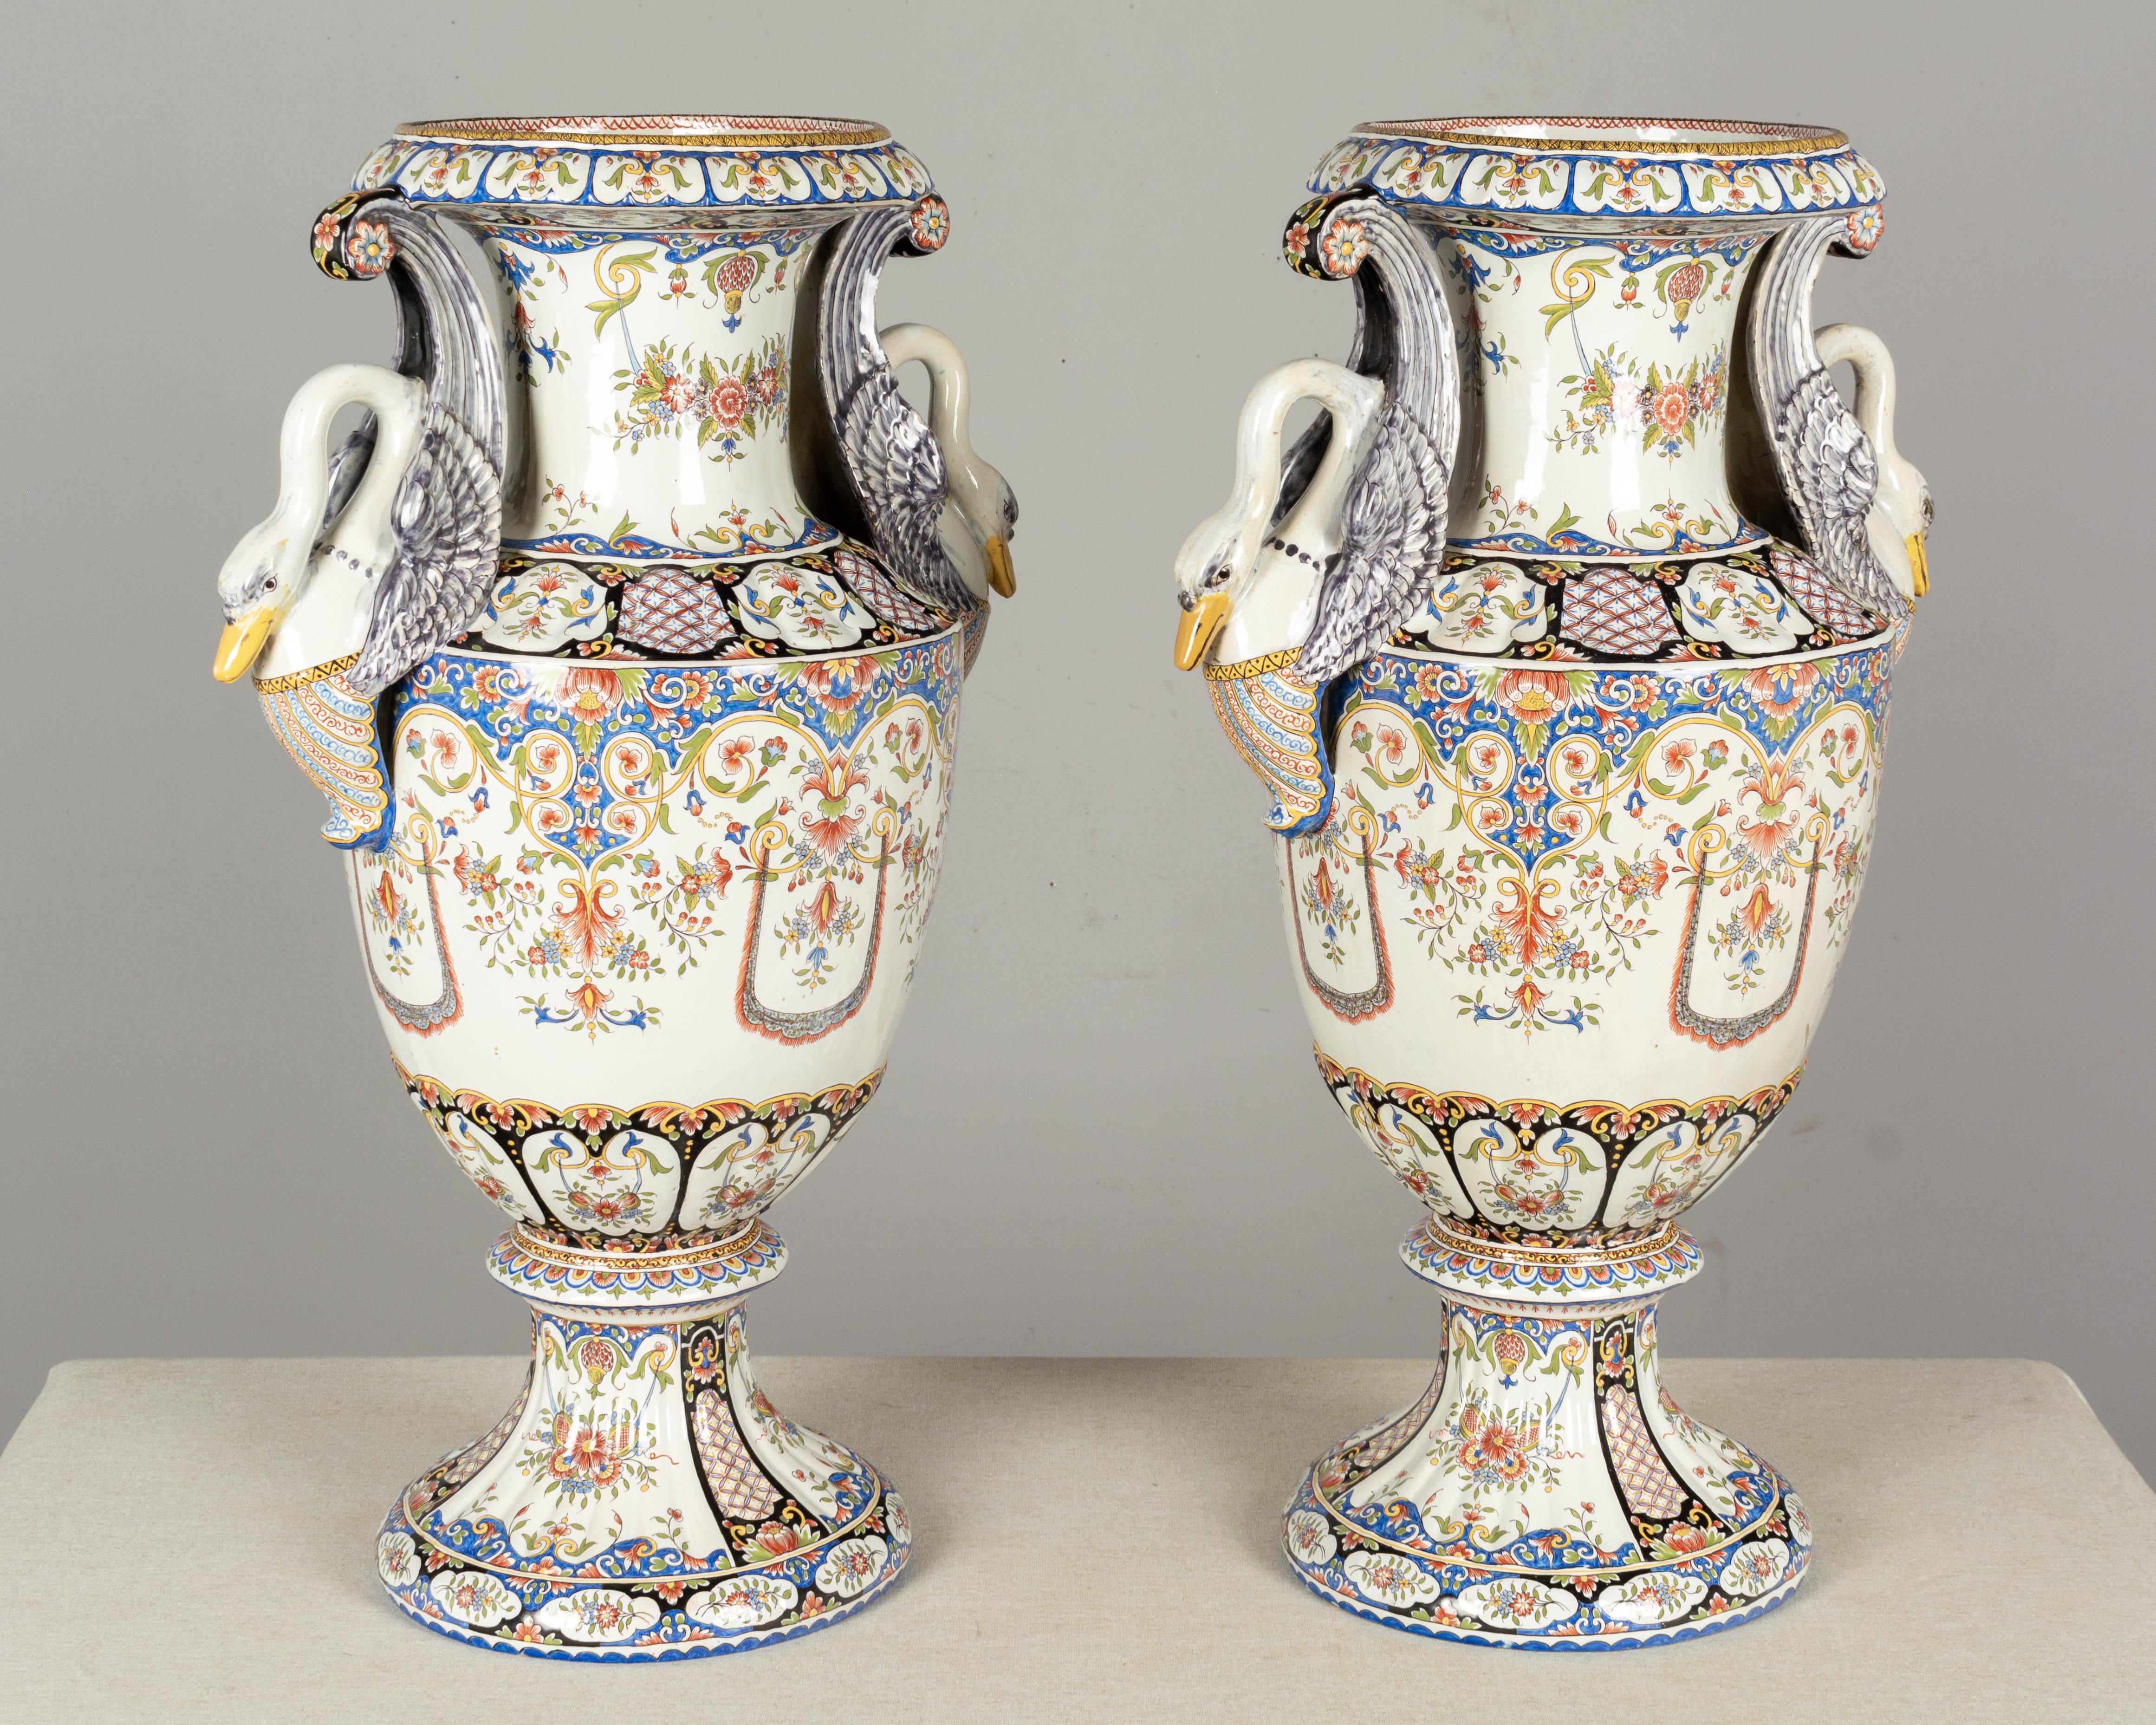 19th Century French Desvres Faience Urns, a Pair For Sale 1